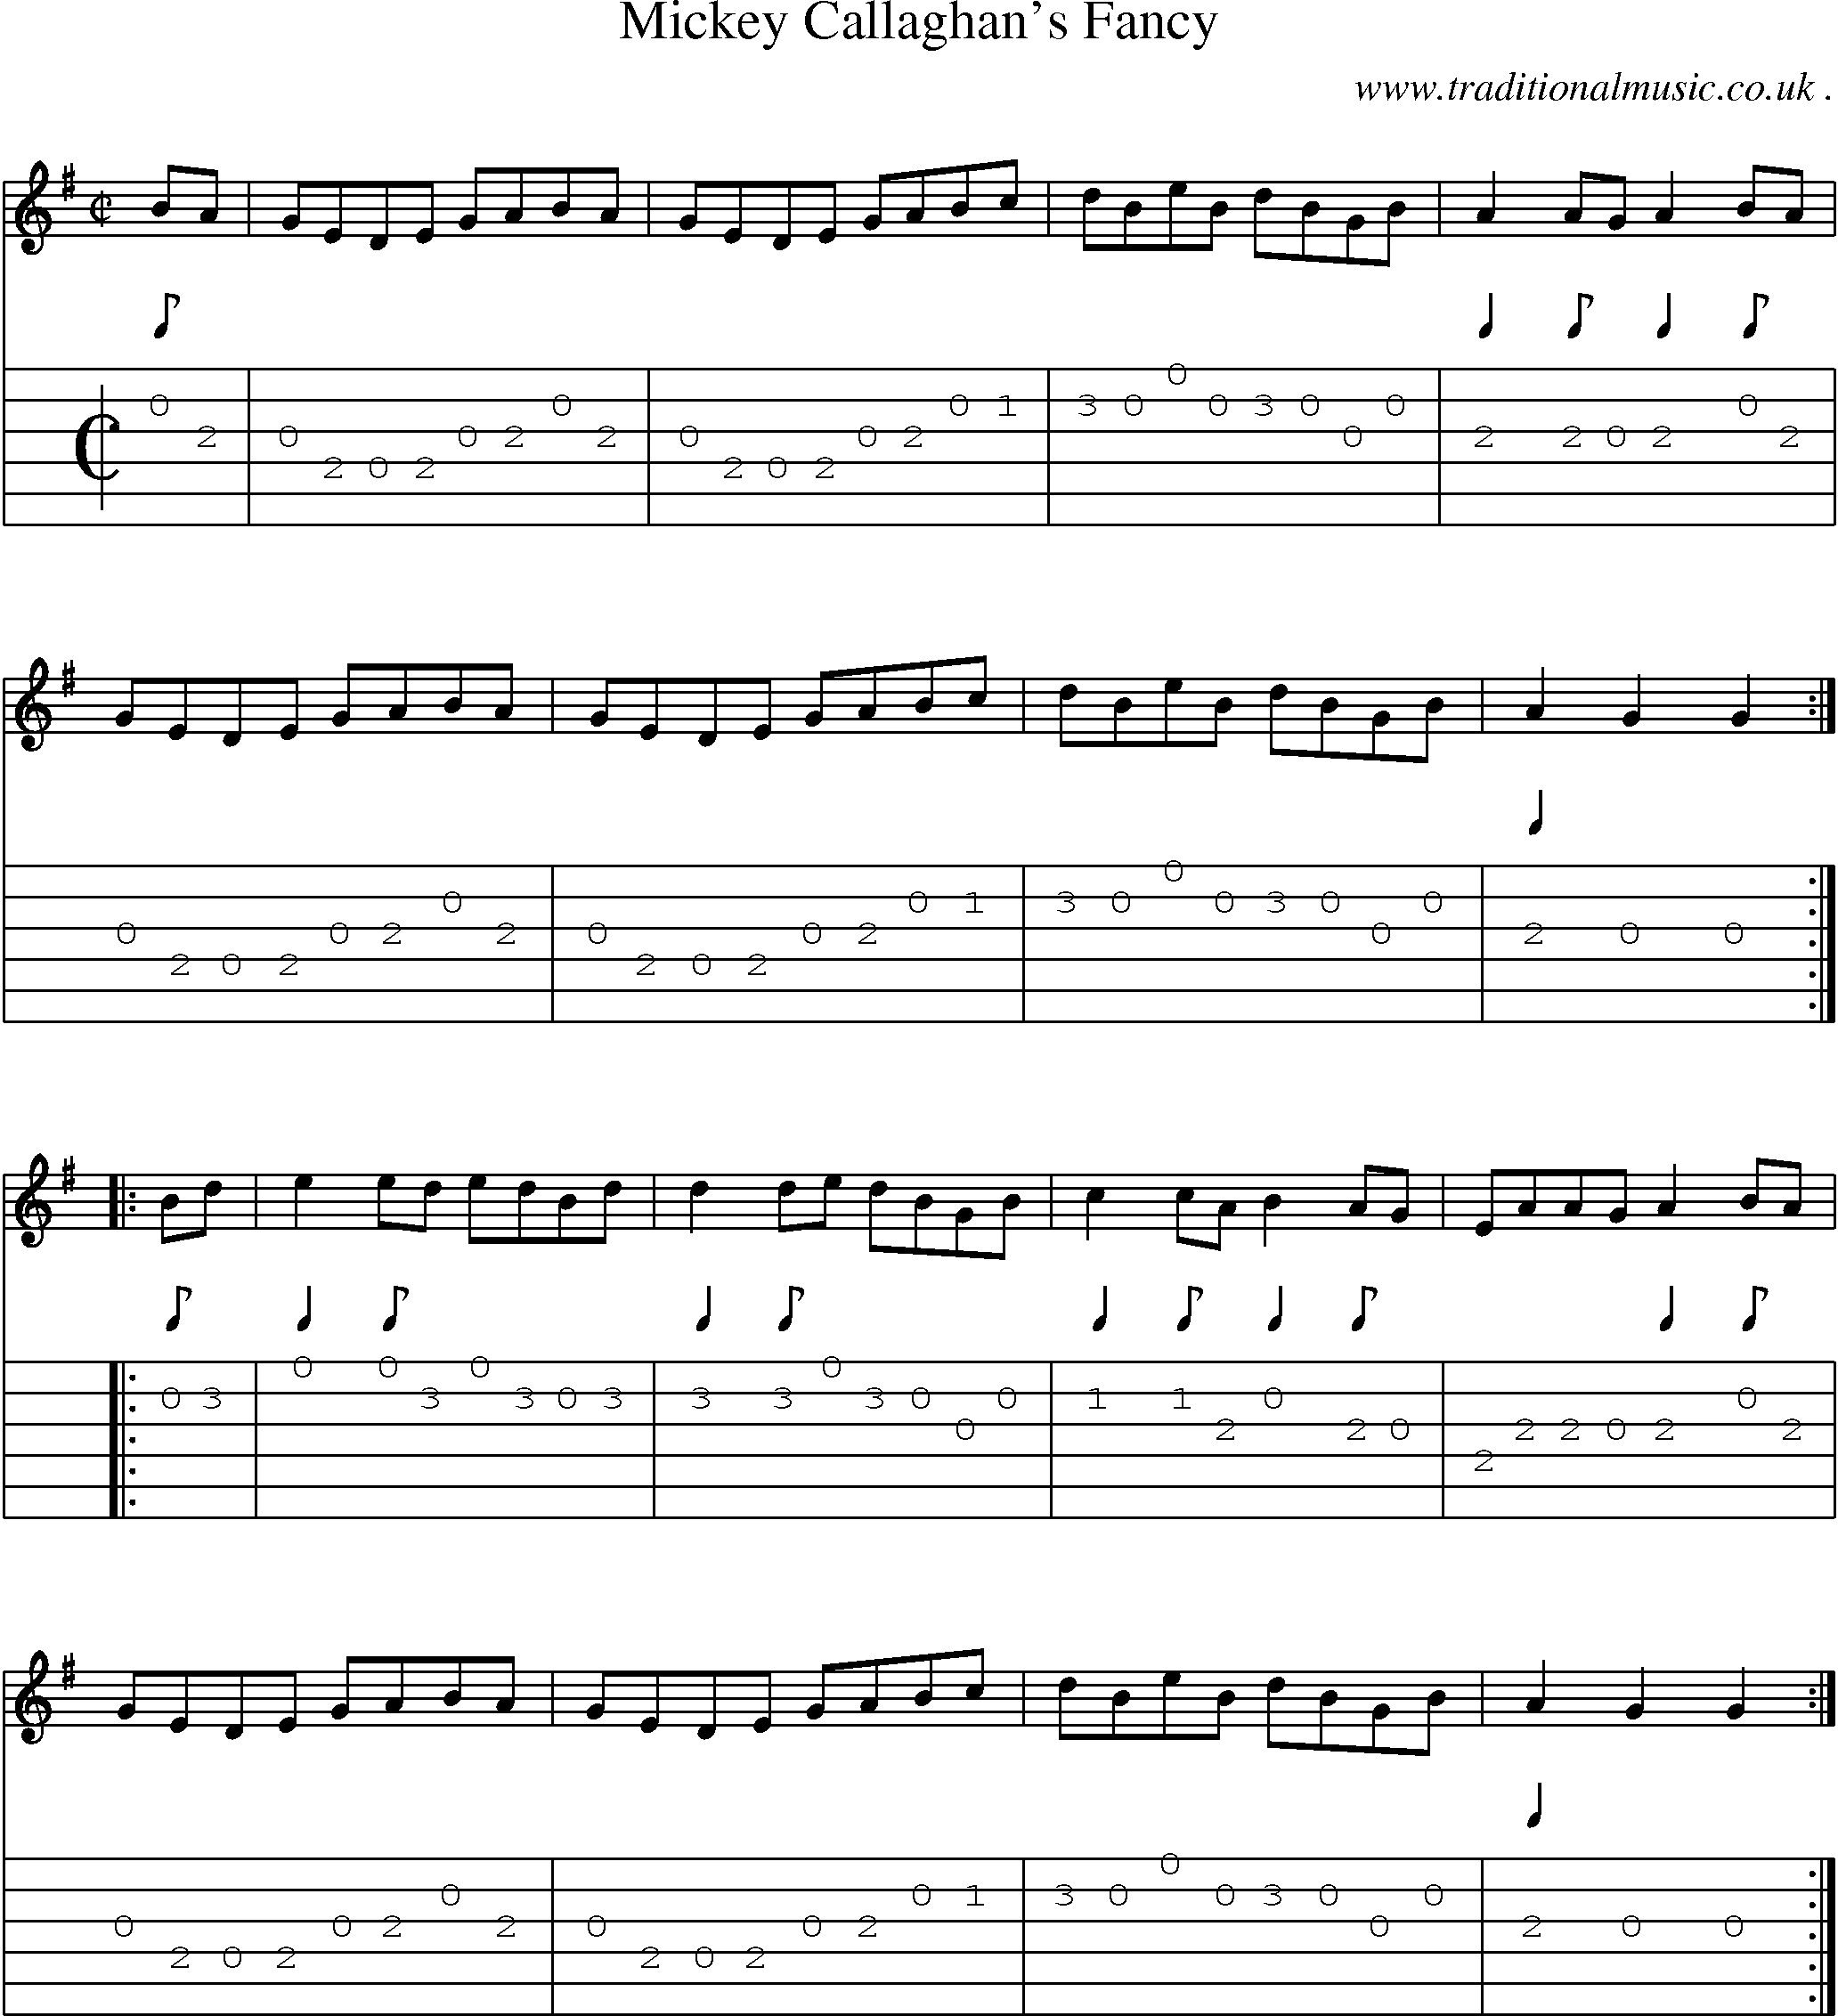 Sheet-Music and Guitar Tabs for Mickey Callaghans Fancy